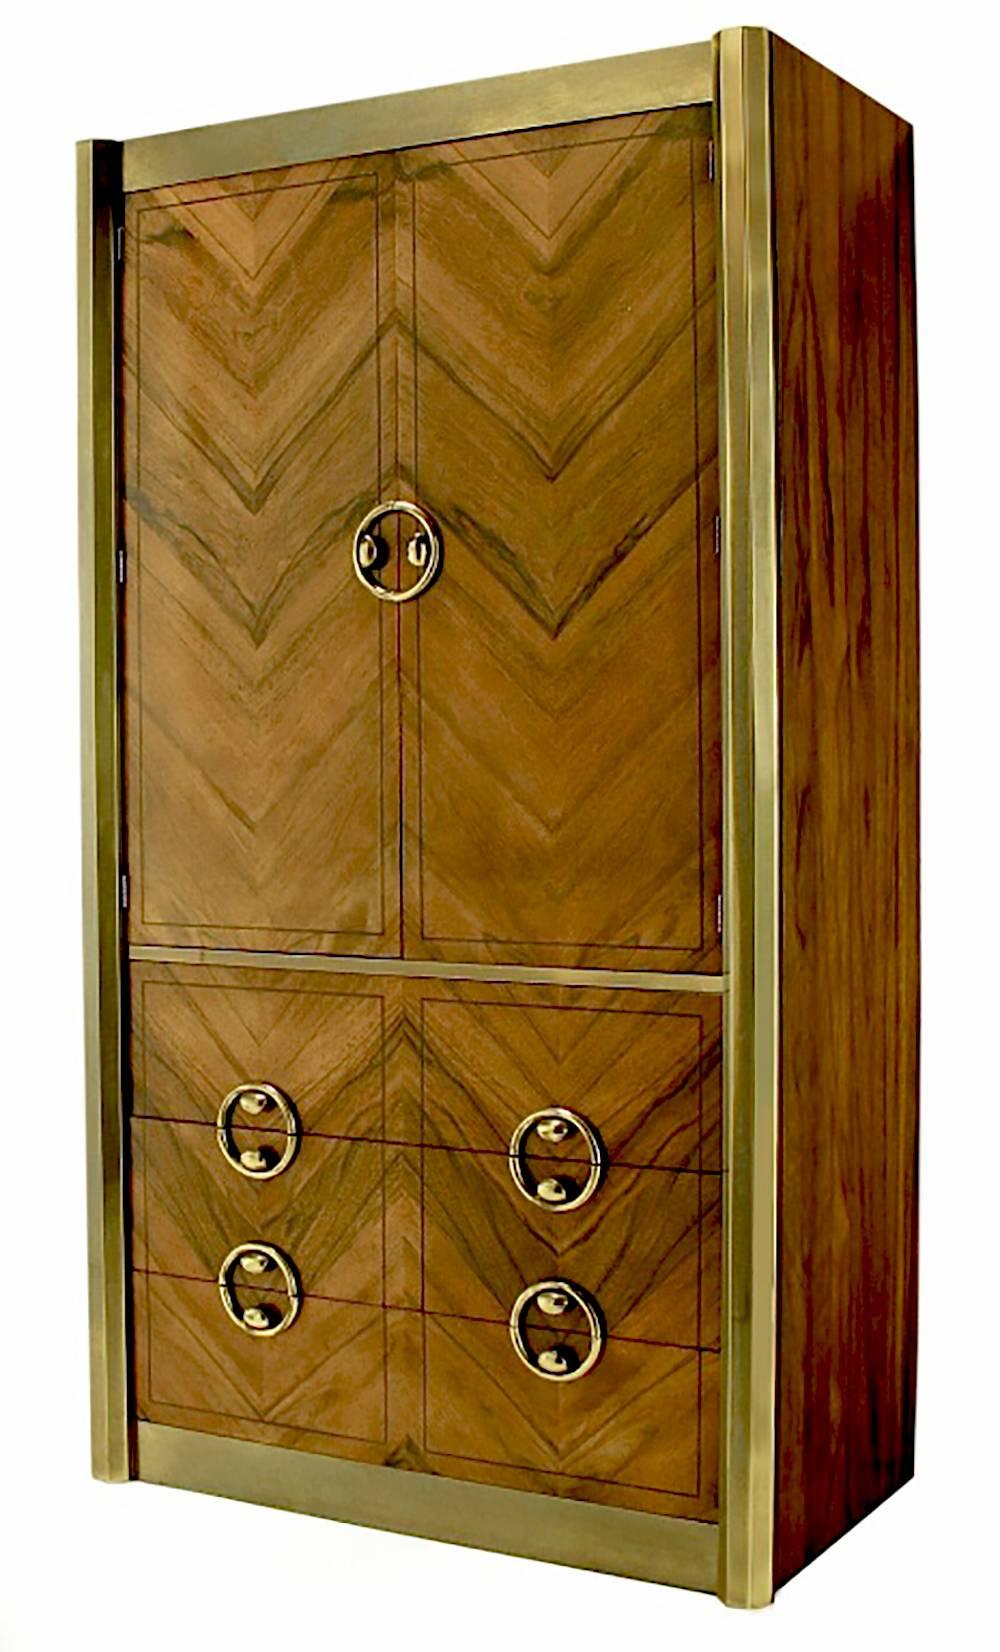 Mastercraft tall wardrobe with patinated brass details. Striking parquetry zebrano wood front in a zig zag pattern. Three lower drawers with upper open, single shelved section. Brushed and patinated demi-octagonal brass side pillars, brass panels to